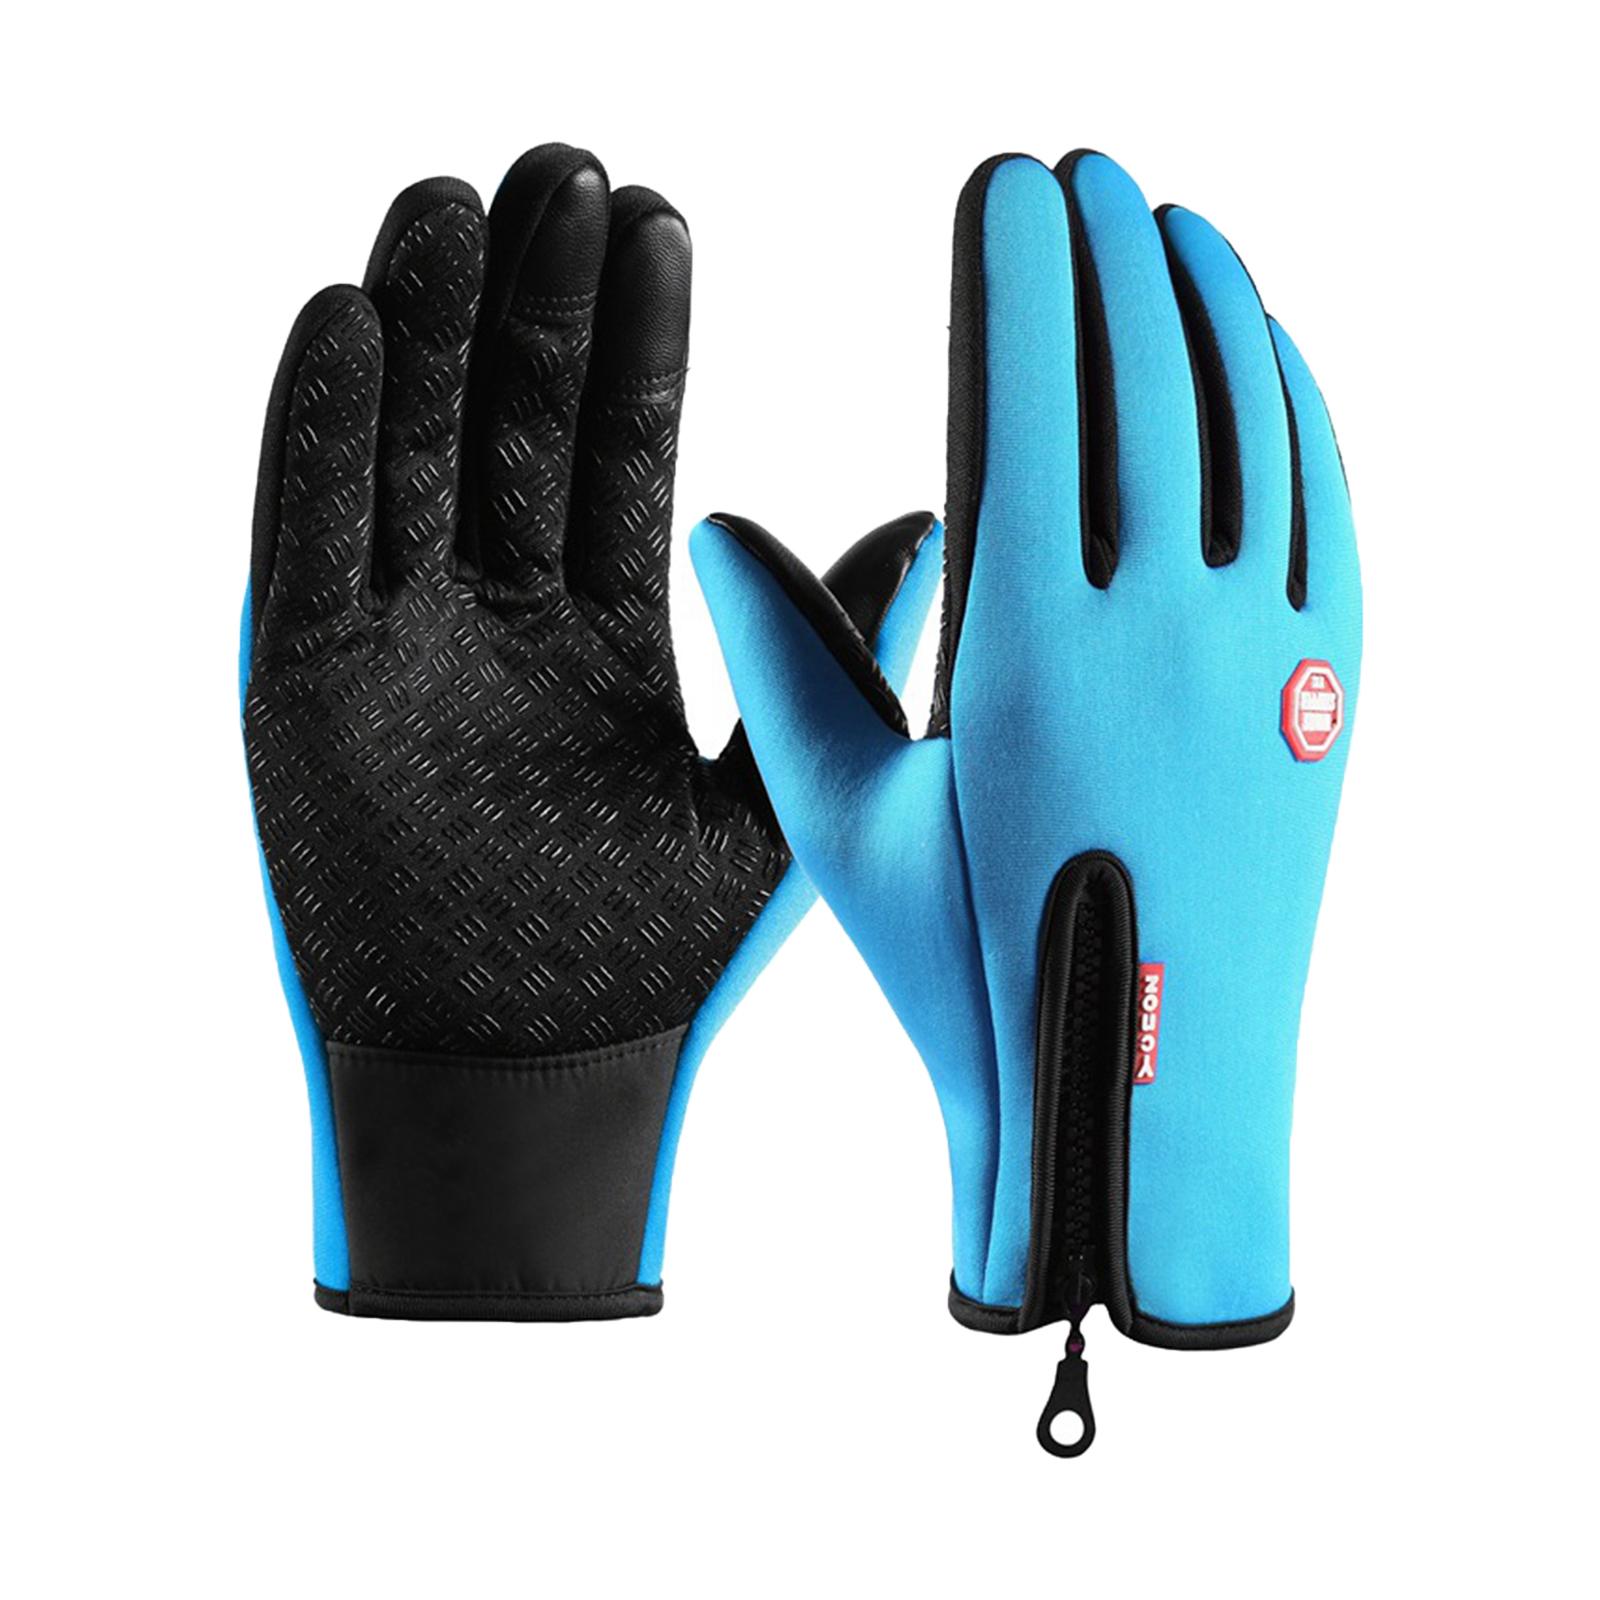 Winter Gloves Windproof Insulated for Motorcycle Cycling Adults Unisex L Blue